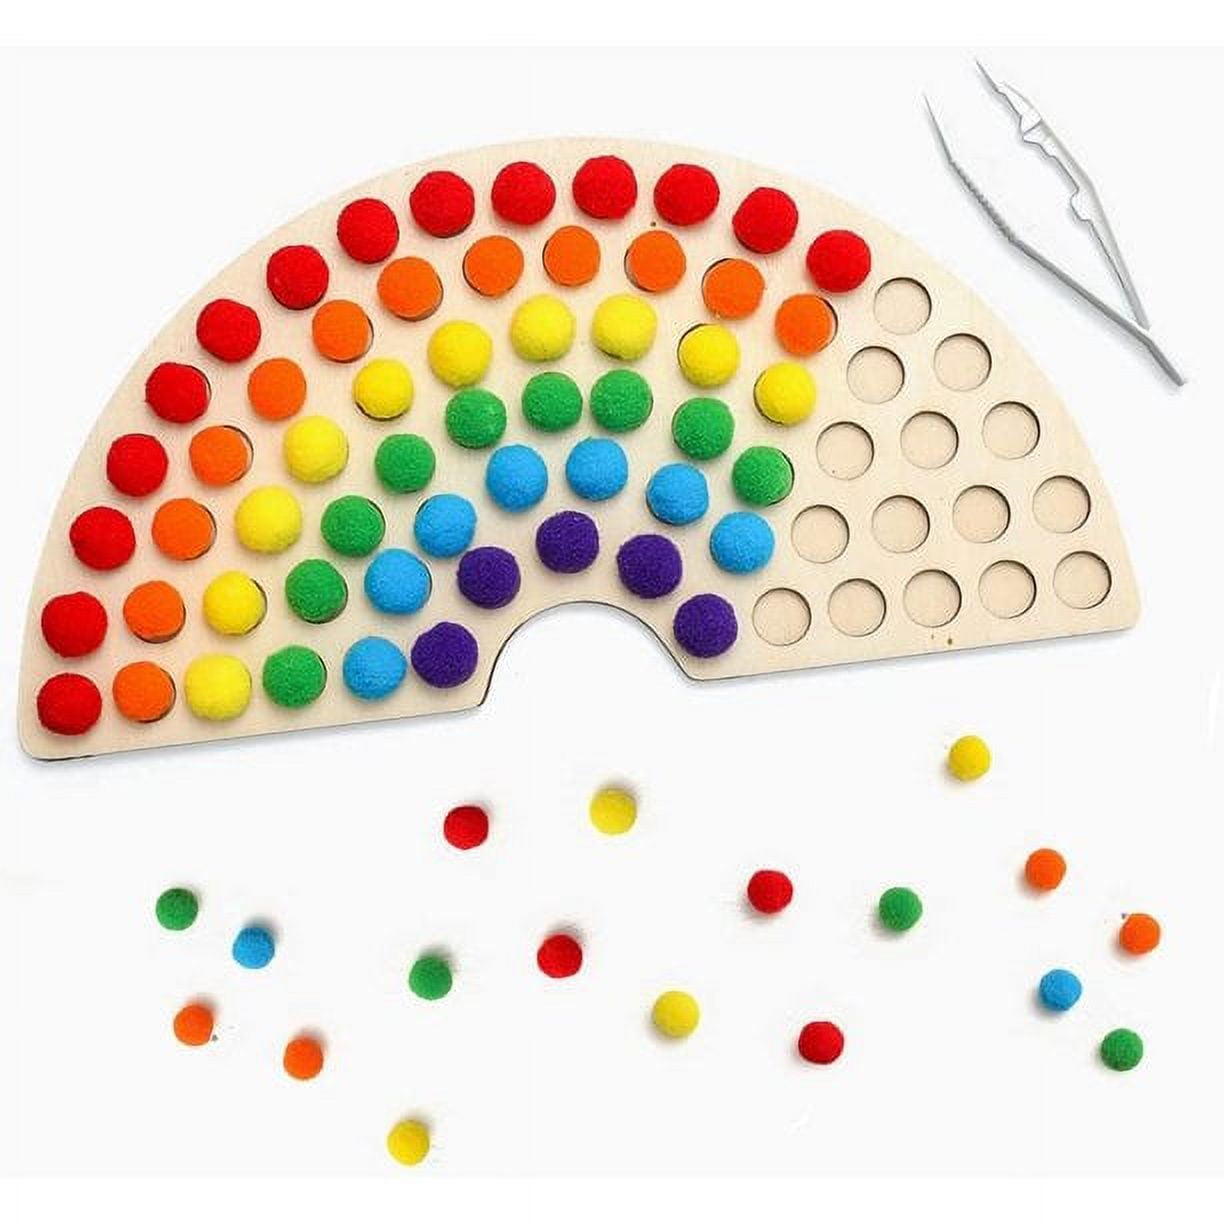 Toddler Rainbow Wooden Montessori Toy Wooden Peg Board Bead Game Children  Stacking Matching Counting Color Sorting Games Gifts - AliExpress